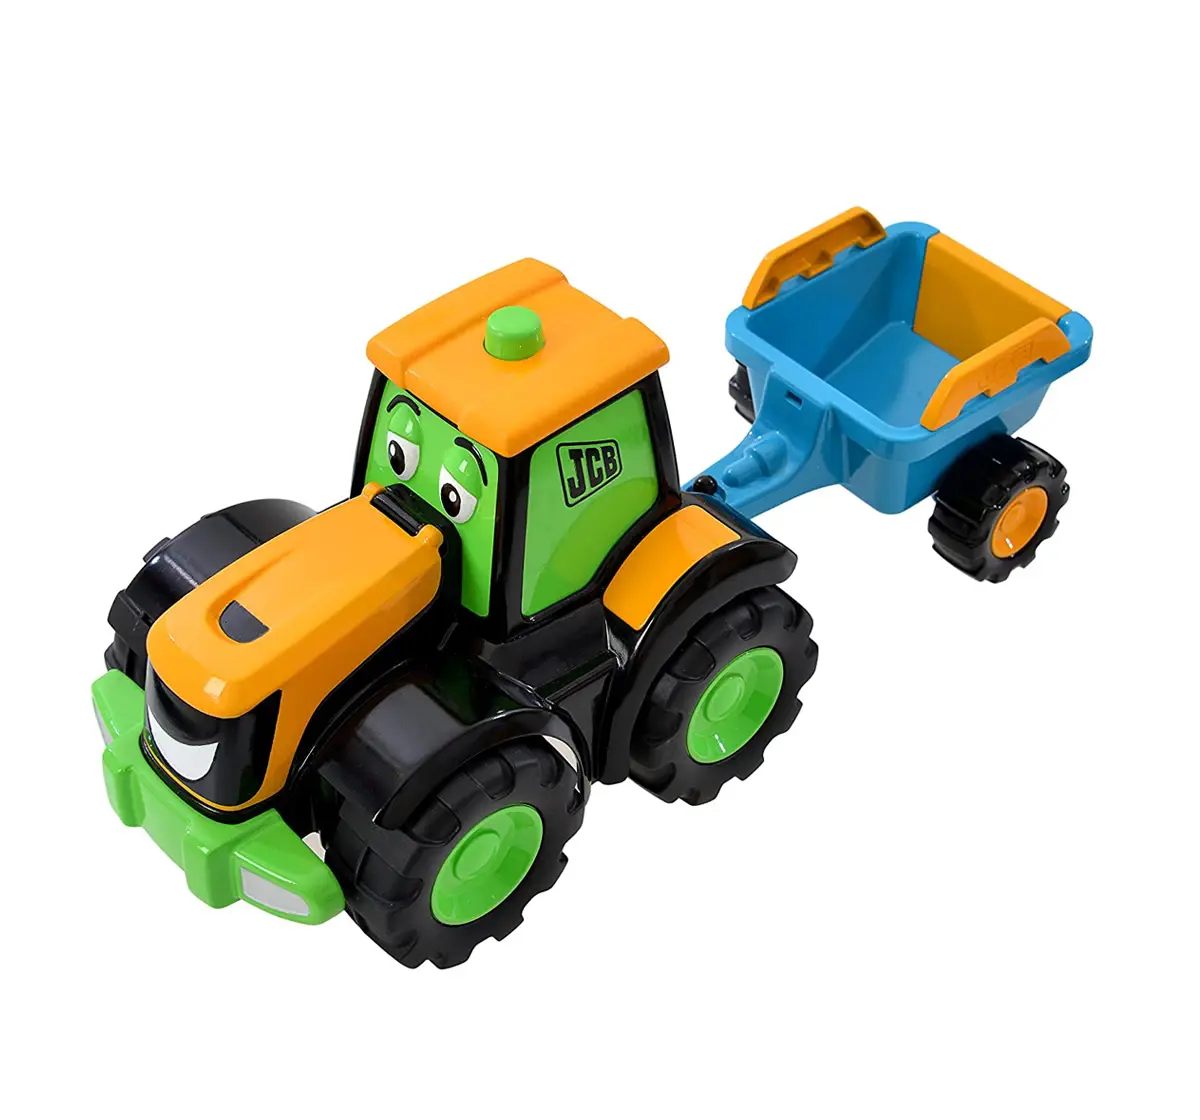 JCB My First Fun Farm Tractor Tim Construction Toys for kids 12M+, Multicolour